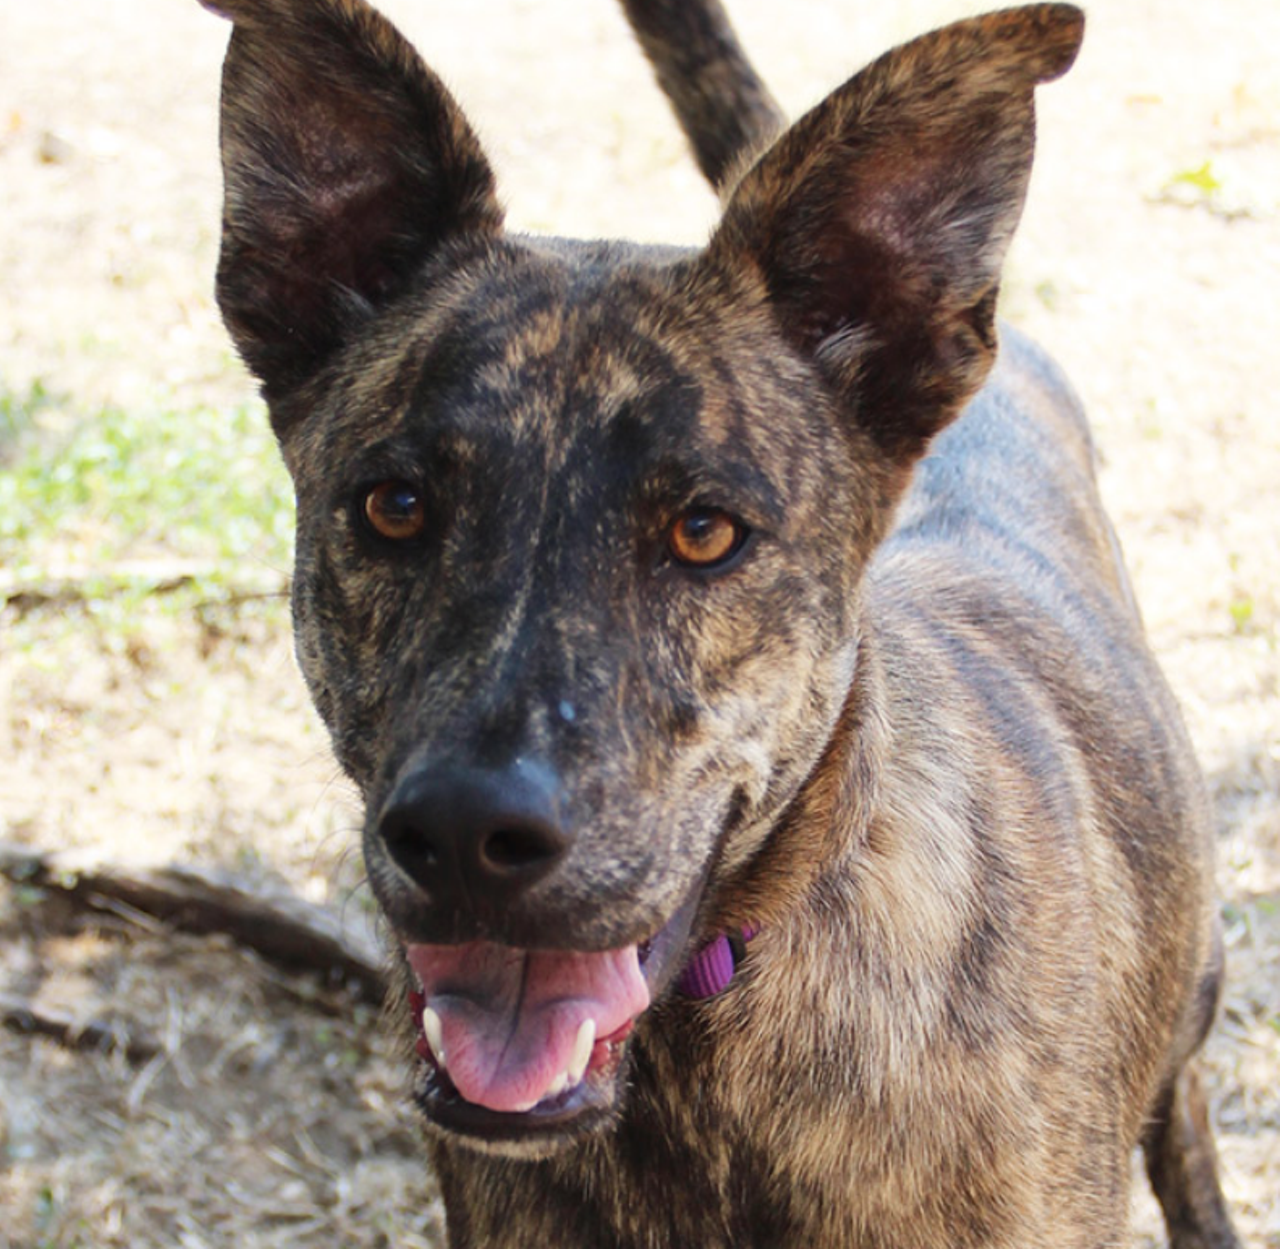 Banjo
"Banjo is my name! I’m a happy and playful boy who’s always ready for an adventure! I’m looking for a home where I get plenty of exercise and have fun with my human. If you’re looking for an active pup to join you on walks, then please give silly me a chance!"